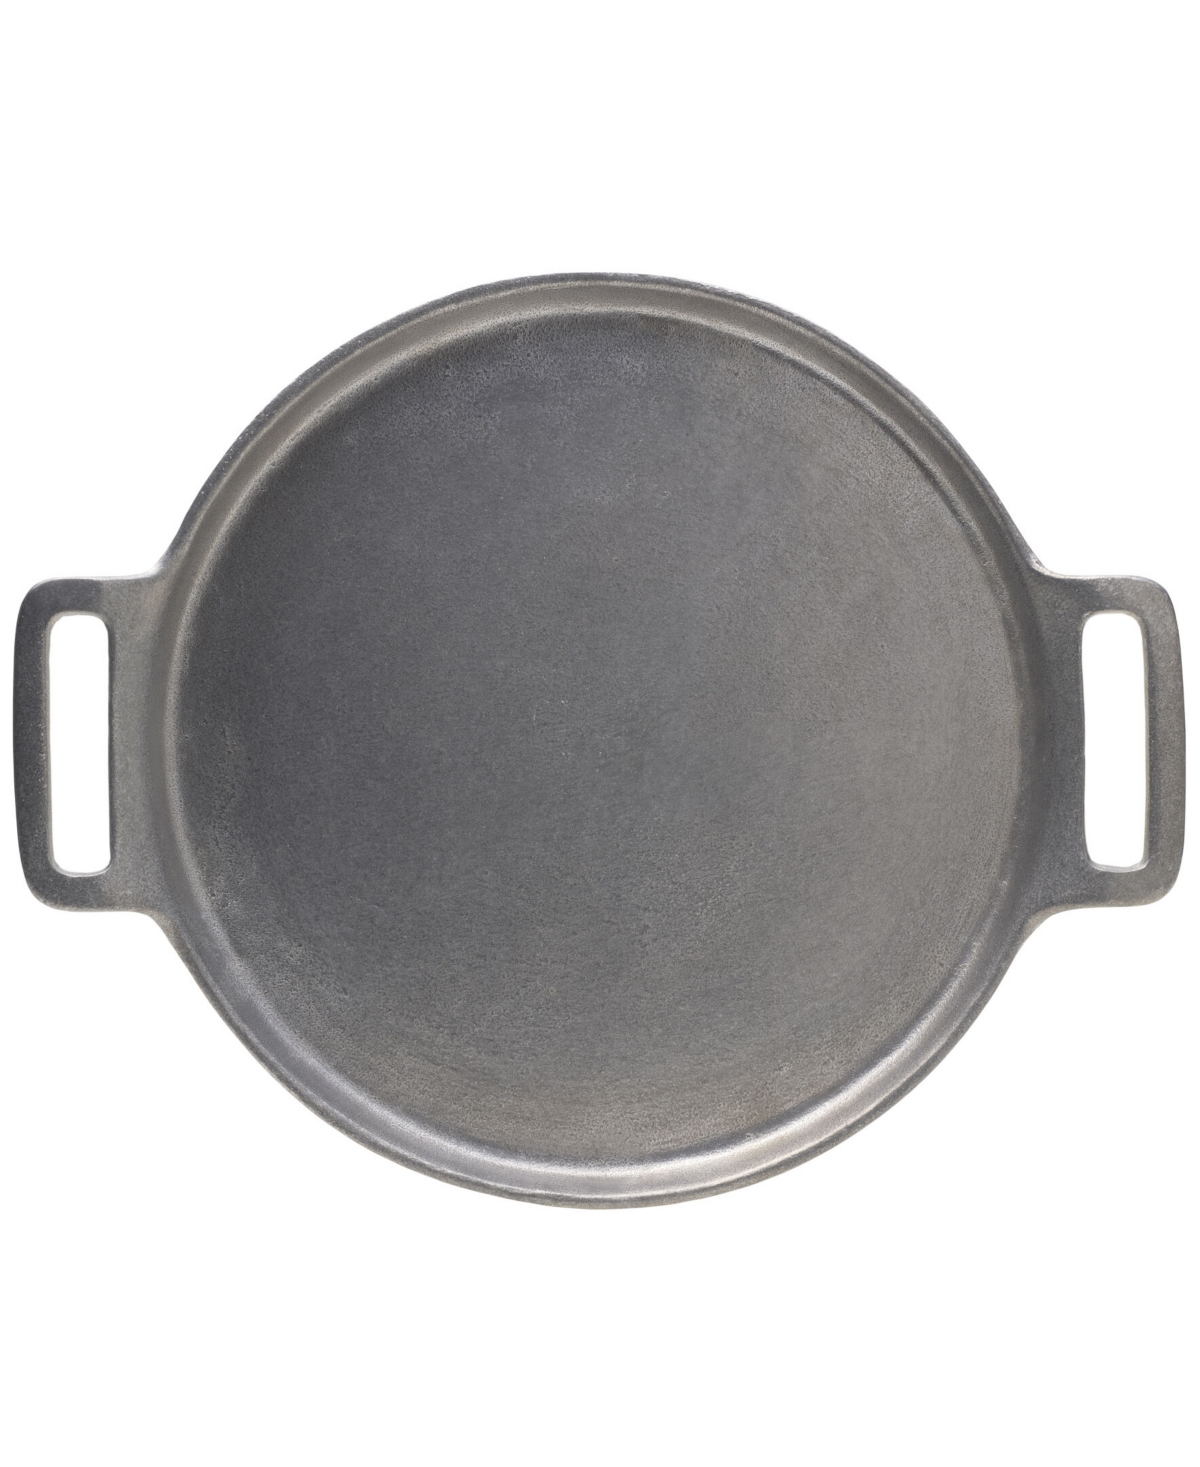 Wilton Armetale Gourmet Grillware Handled Pizza Tray In Silver